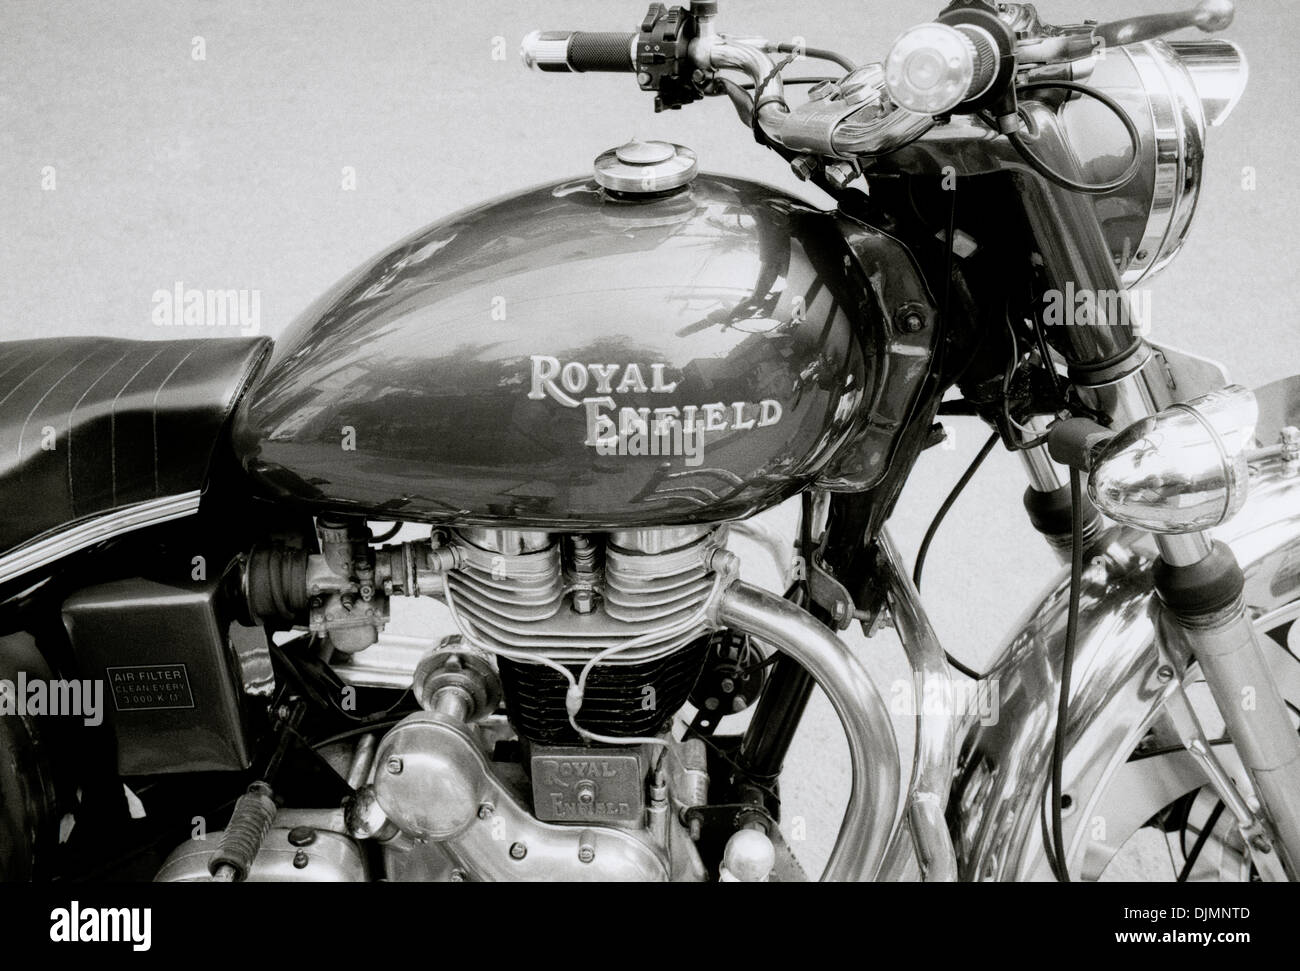 Royal Enfield motorbike in Kochi Cochin in Kerala in India in South Asia. Motor Machine Transport History Classic Vintage Bike Automotive Travel Stock Photo